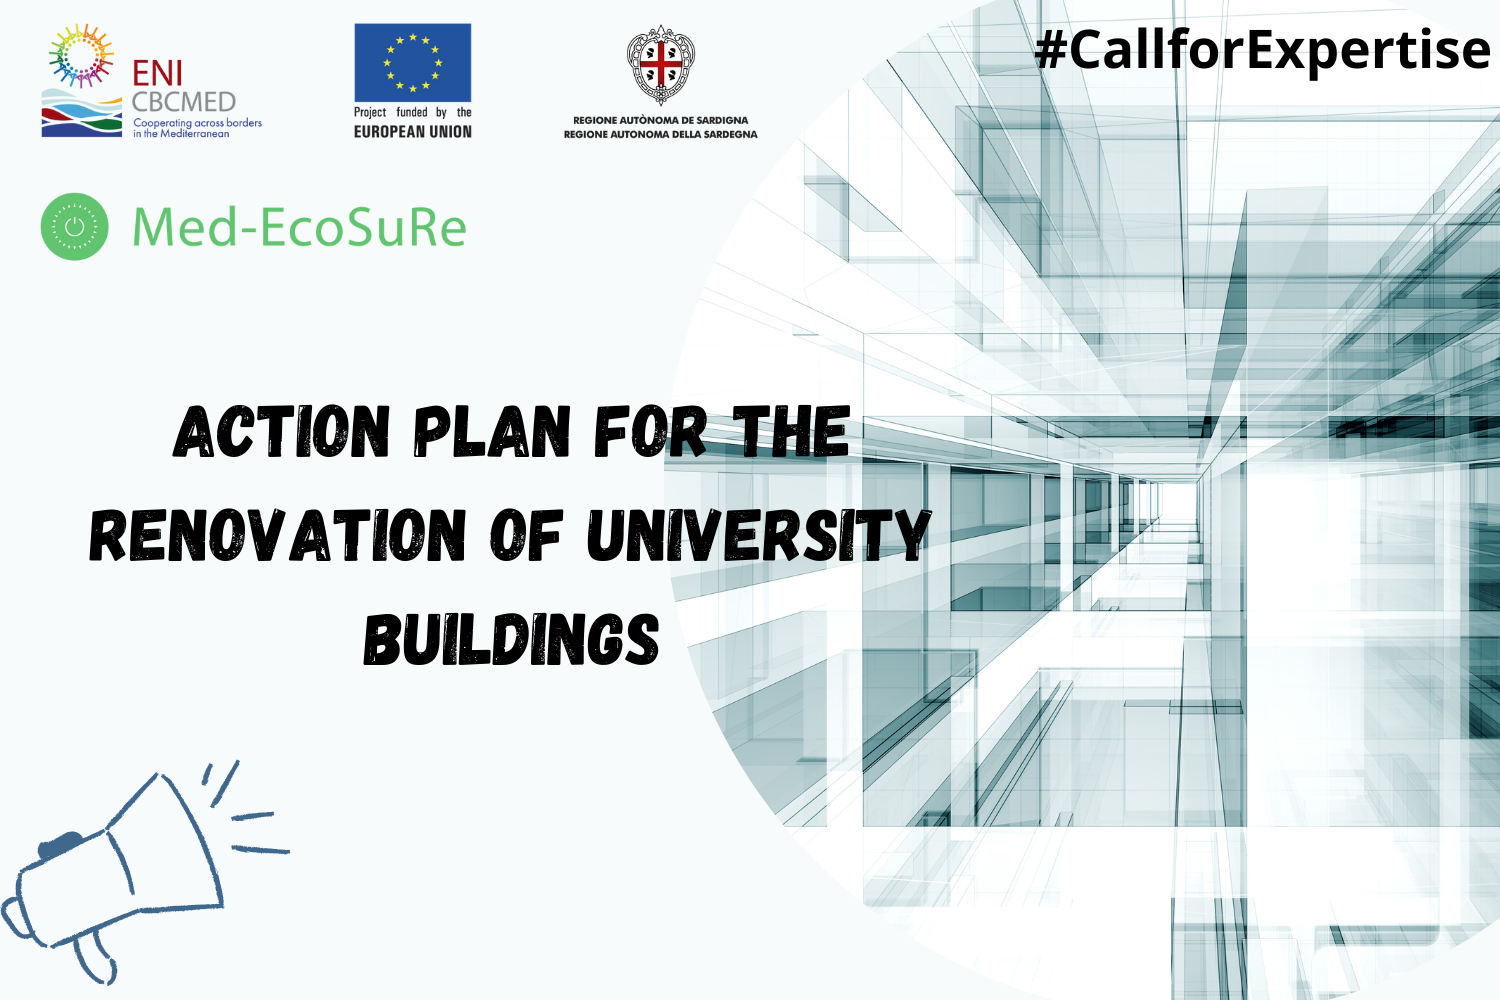 [Med-EcoSuRe] Deadline extended for the call of expertise to elaborate an action plan for university buildings renovation in Tunisia